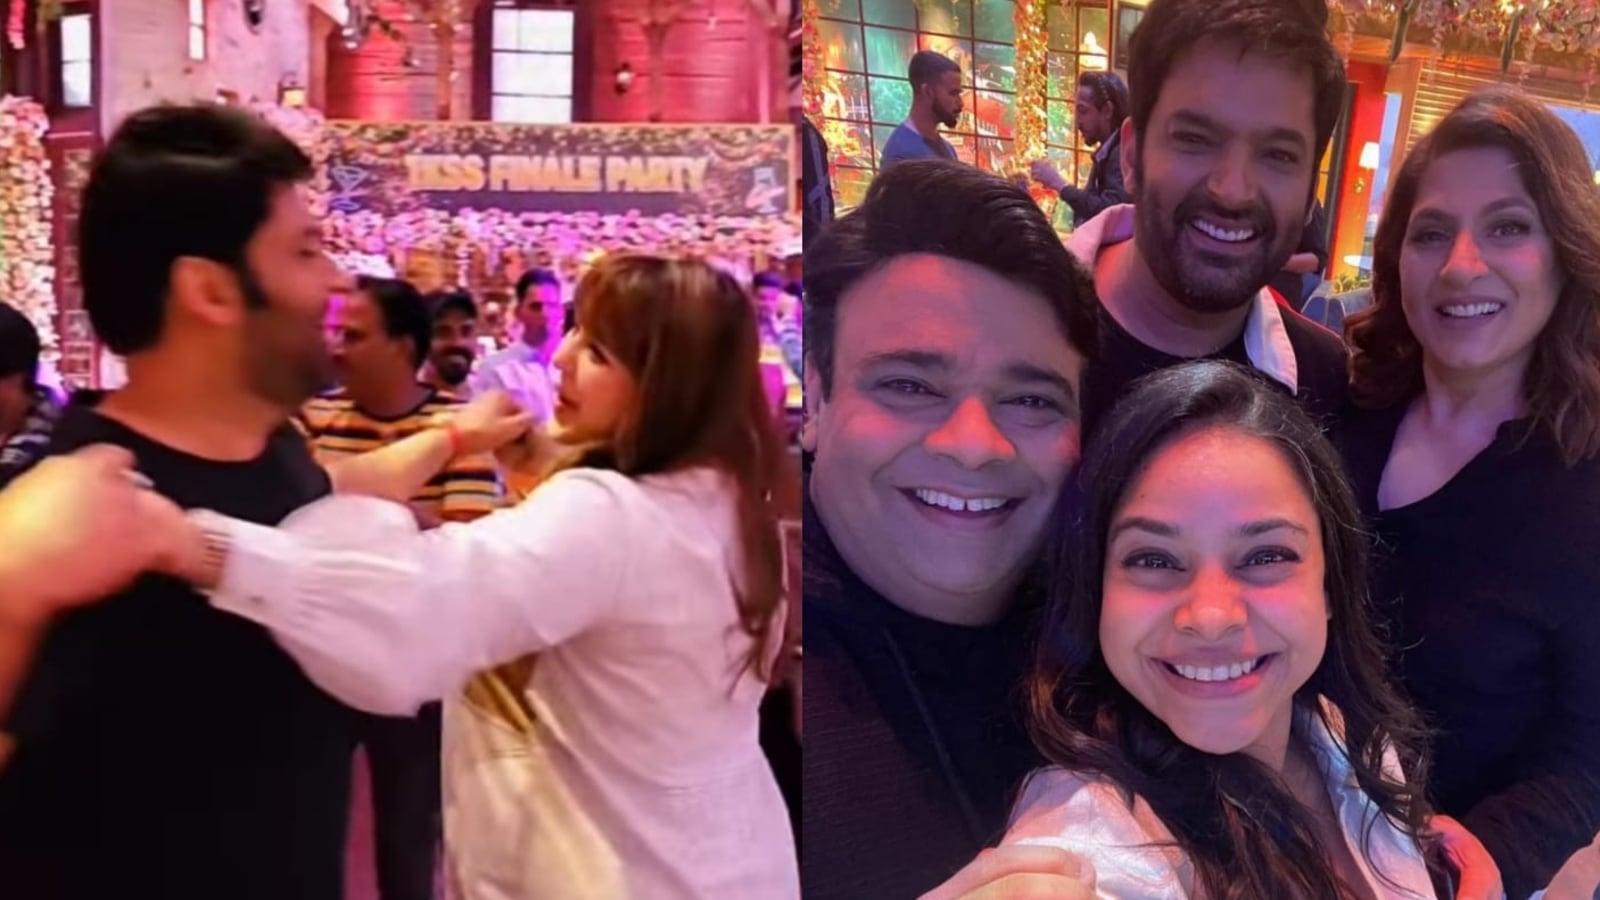 Kapil Sharma dances with Gini Chatrath; cast clicks selfies at The Kapil Sharma Show wrap party. See pics